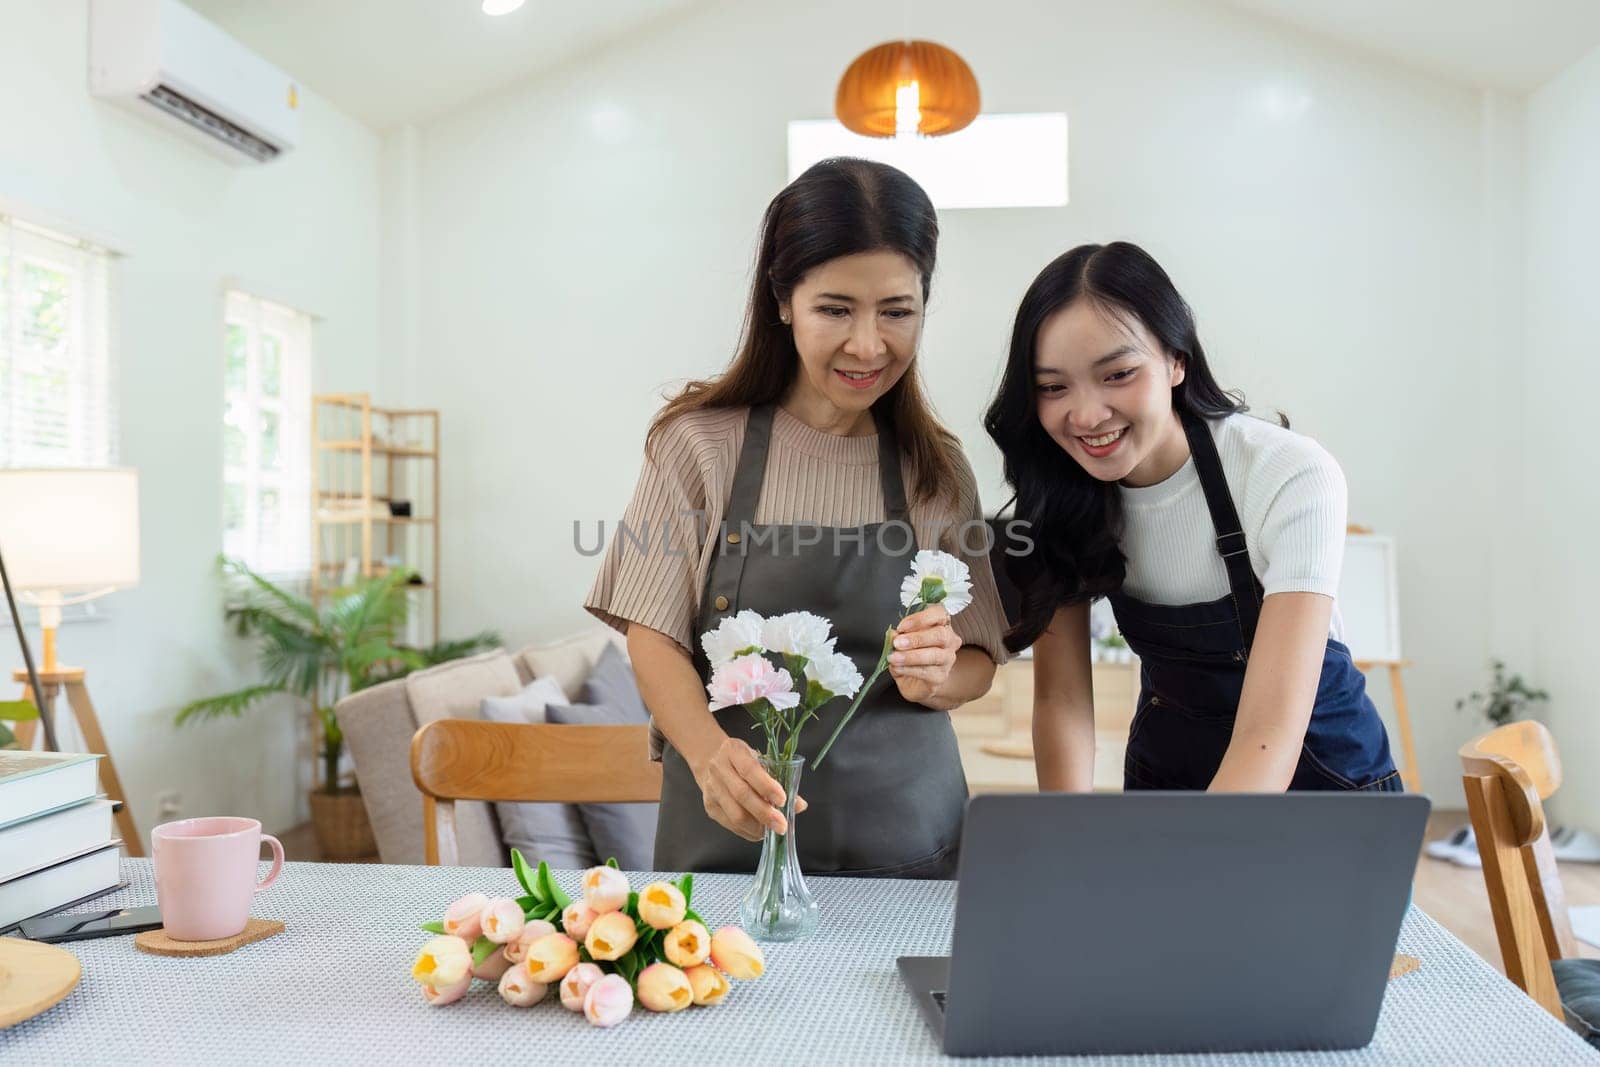 Mother and daughter arrange flower together at home on the weekend, family activities, mother and daughter do activities together on Mother's Day.